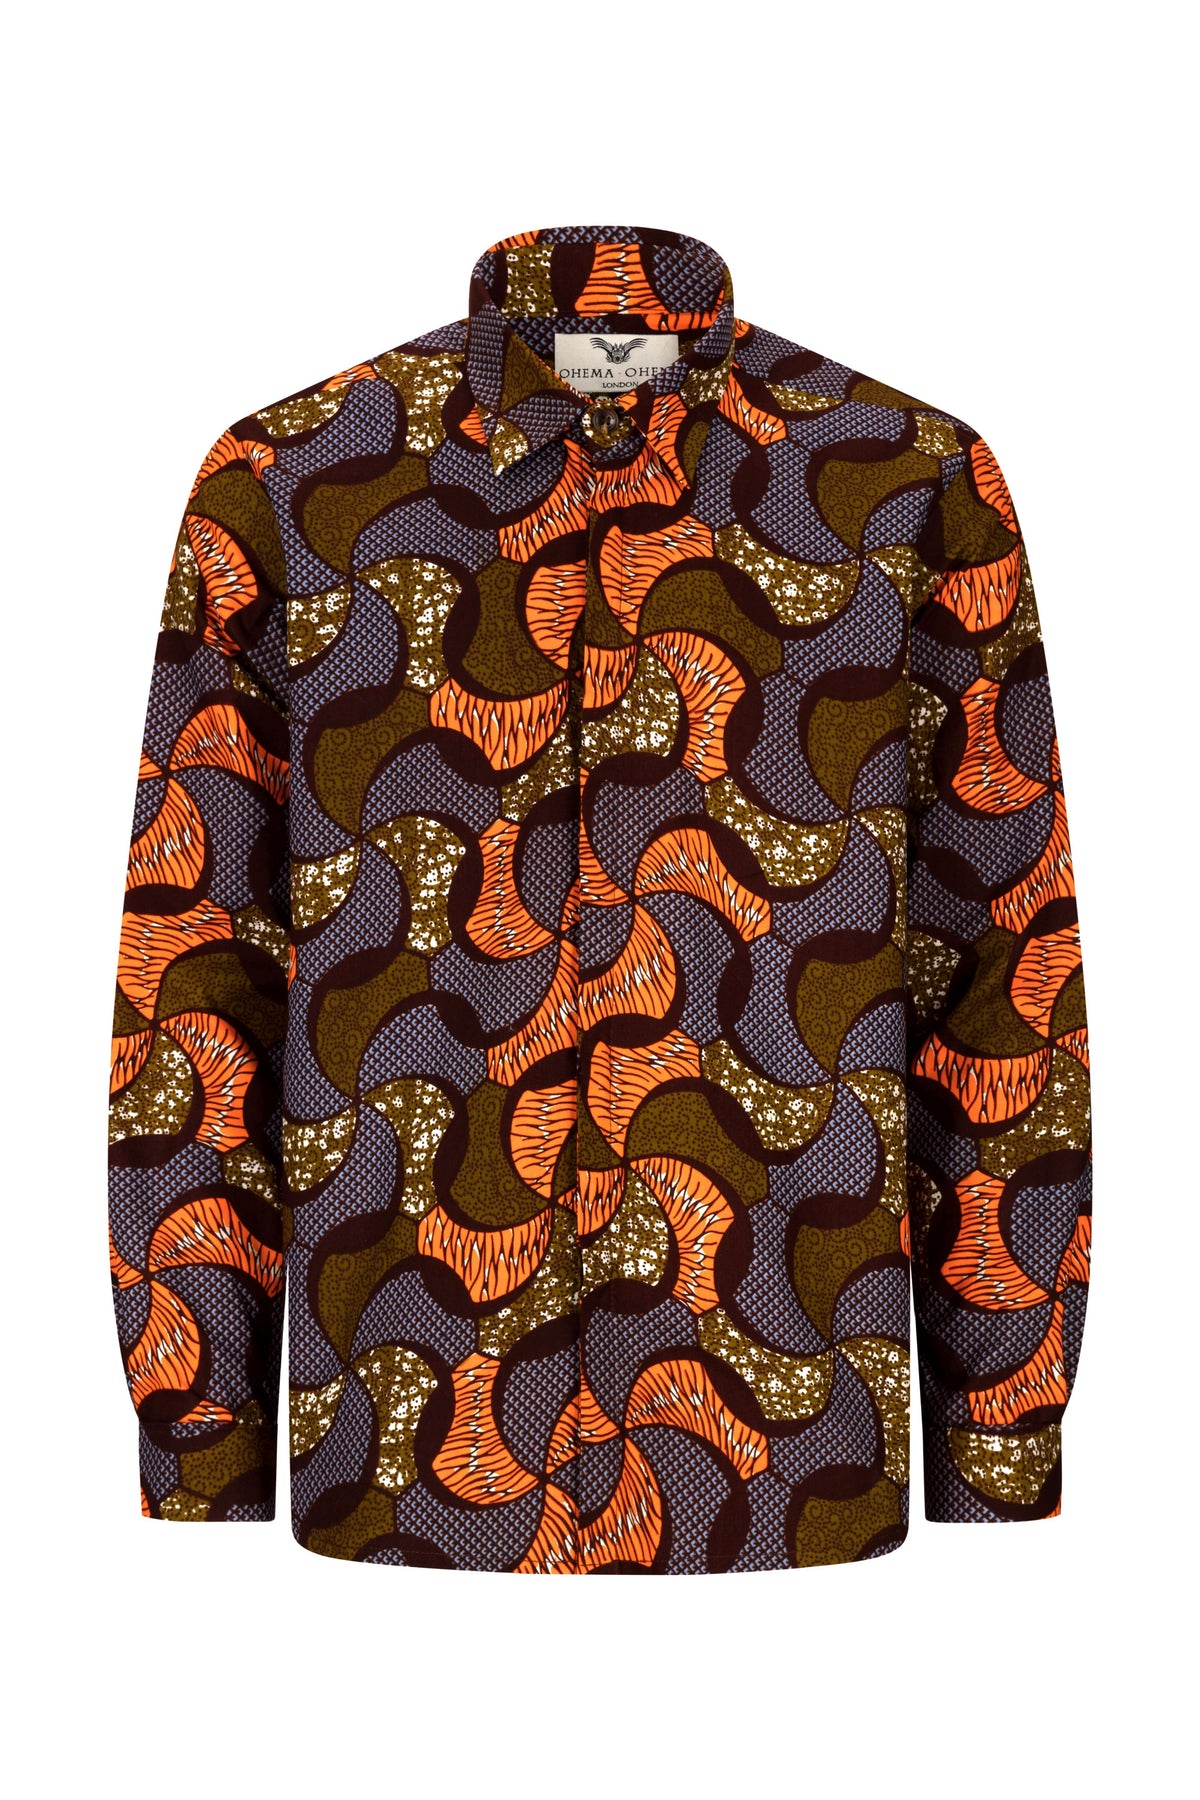 Men's Relaxed fit Long sleeve African print shirt-Chocolo - OHEMA OHENE AFRICAN INSPIRED FASHION